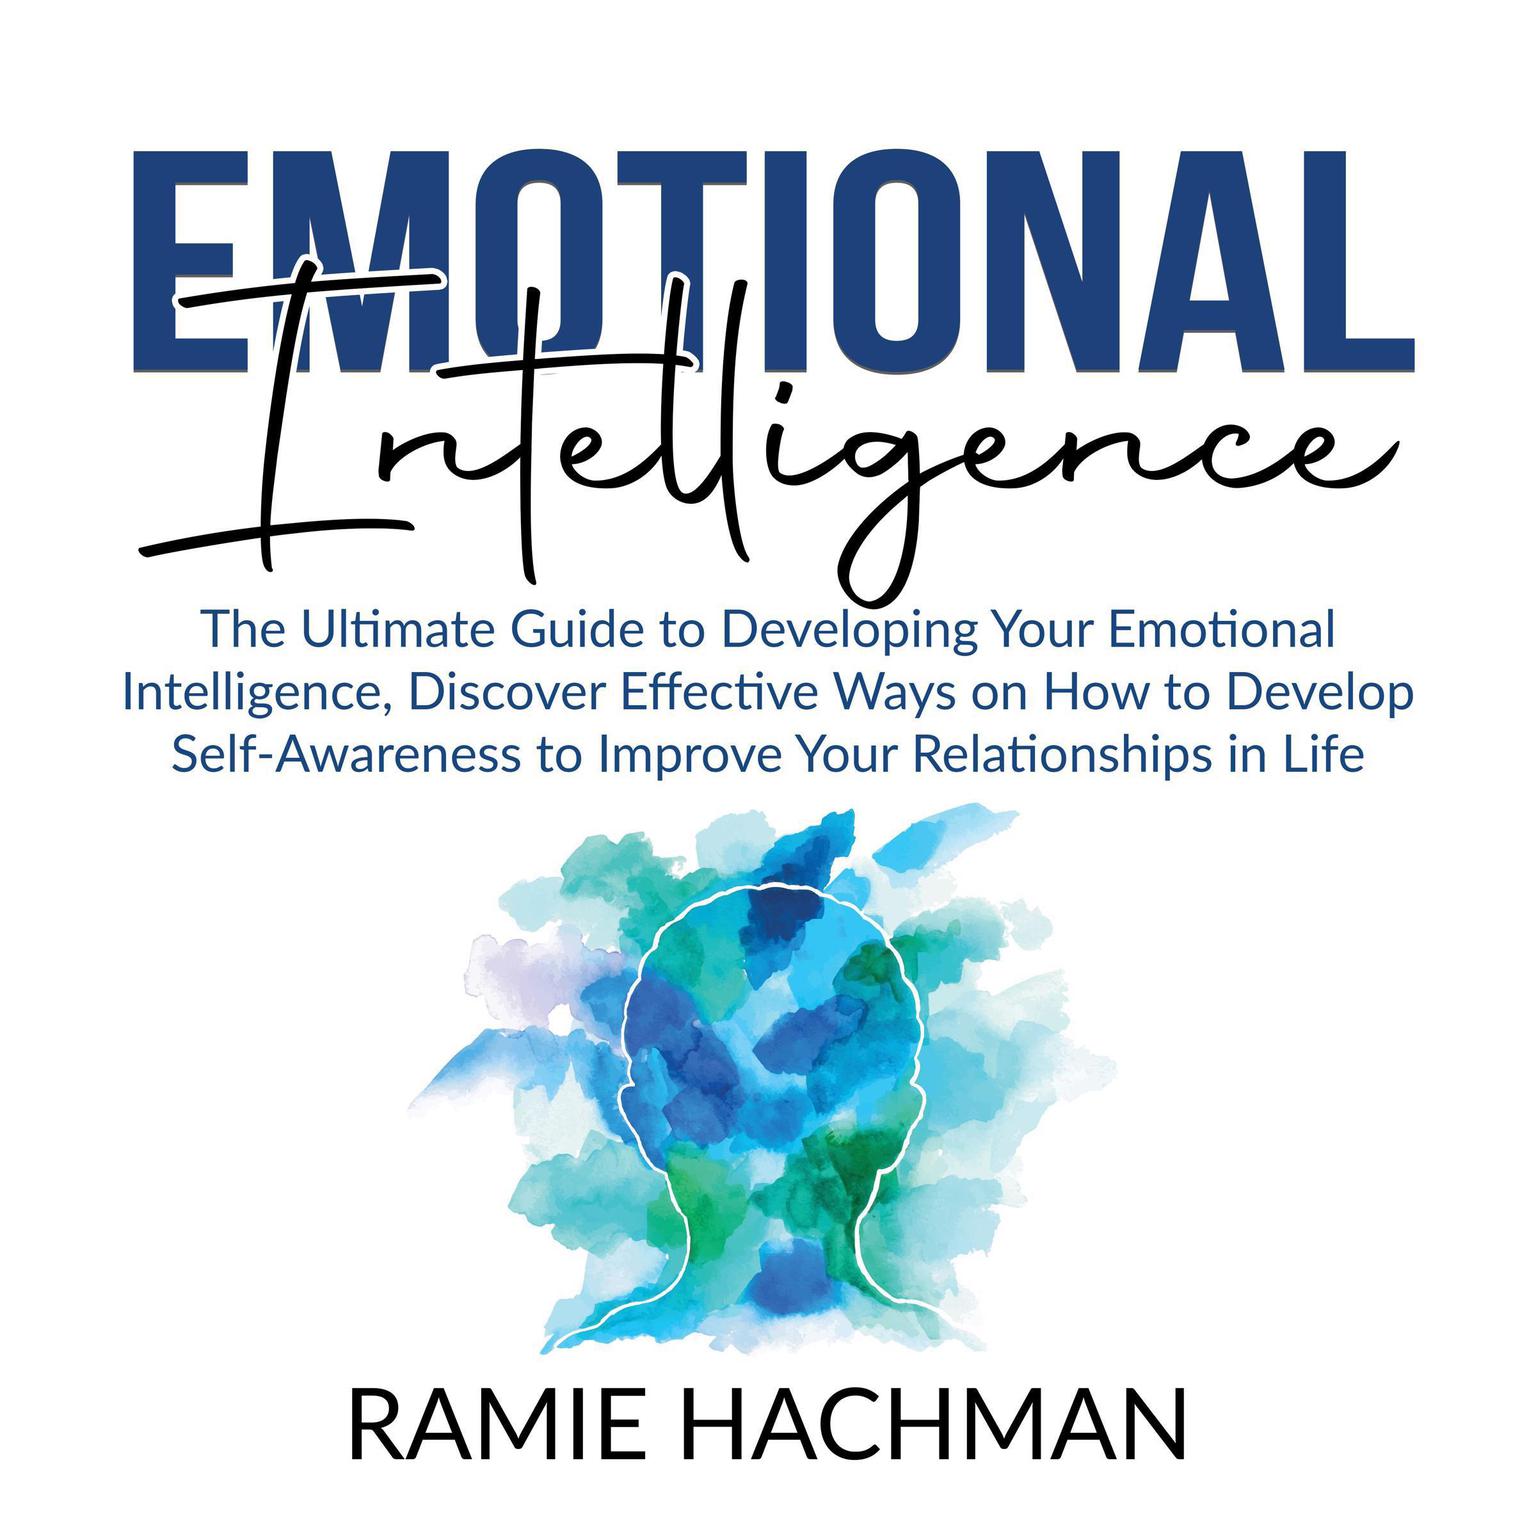 Emotional Intelligence: : The Ultimate Guide to Developing Your Emotional Intelligence, Discover Effective Ways on How to Develop Self-Awareness to Improve Your Relationships in Life Audiobook, by Ramie Hachman